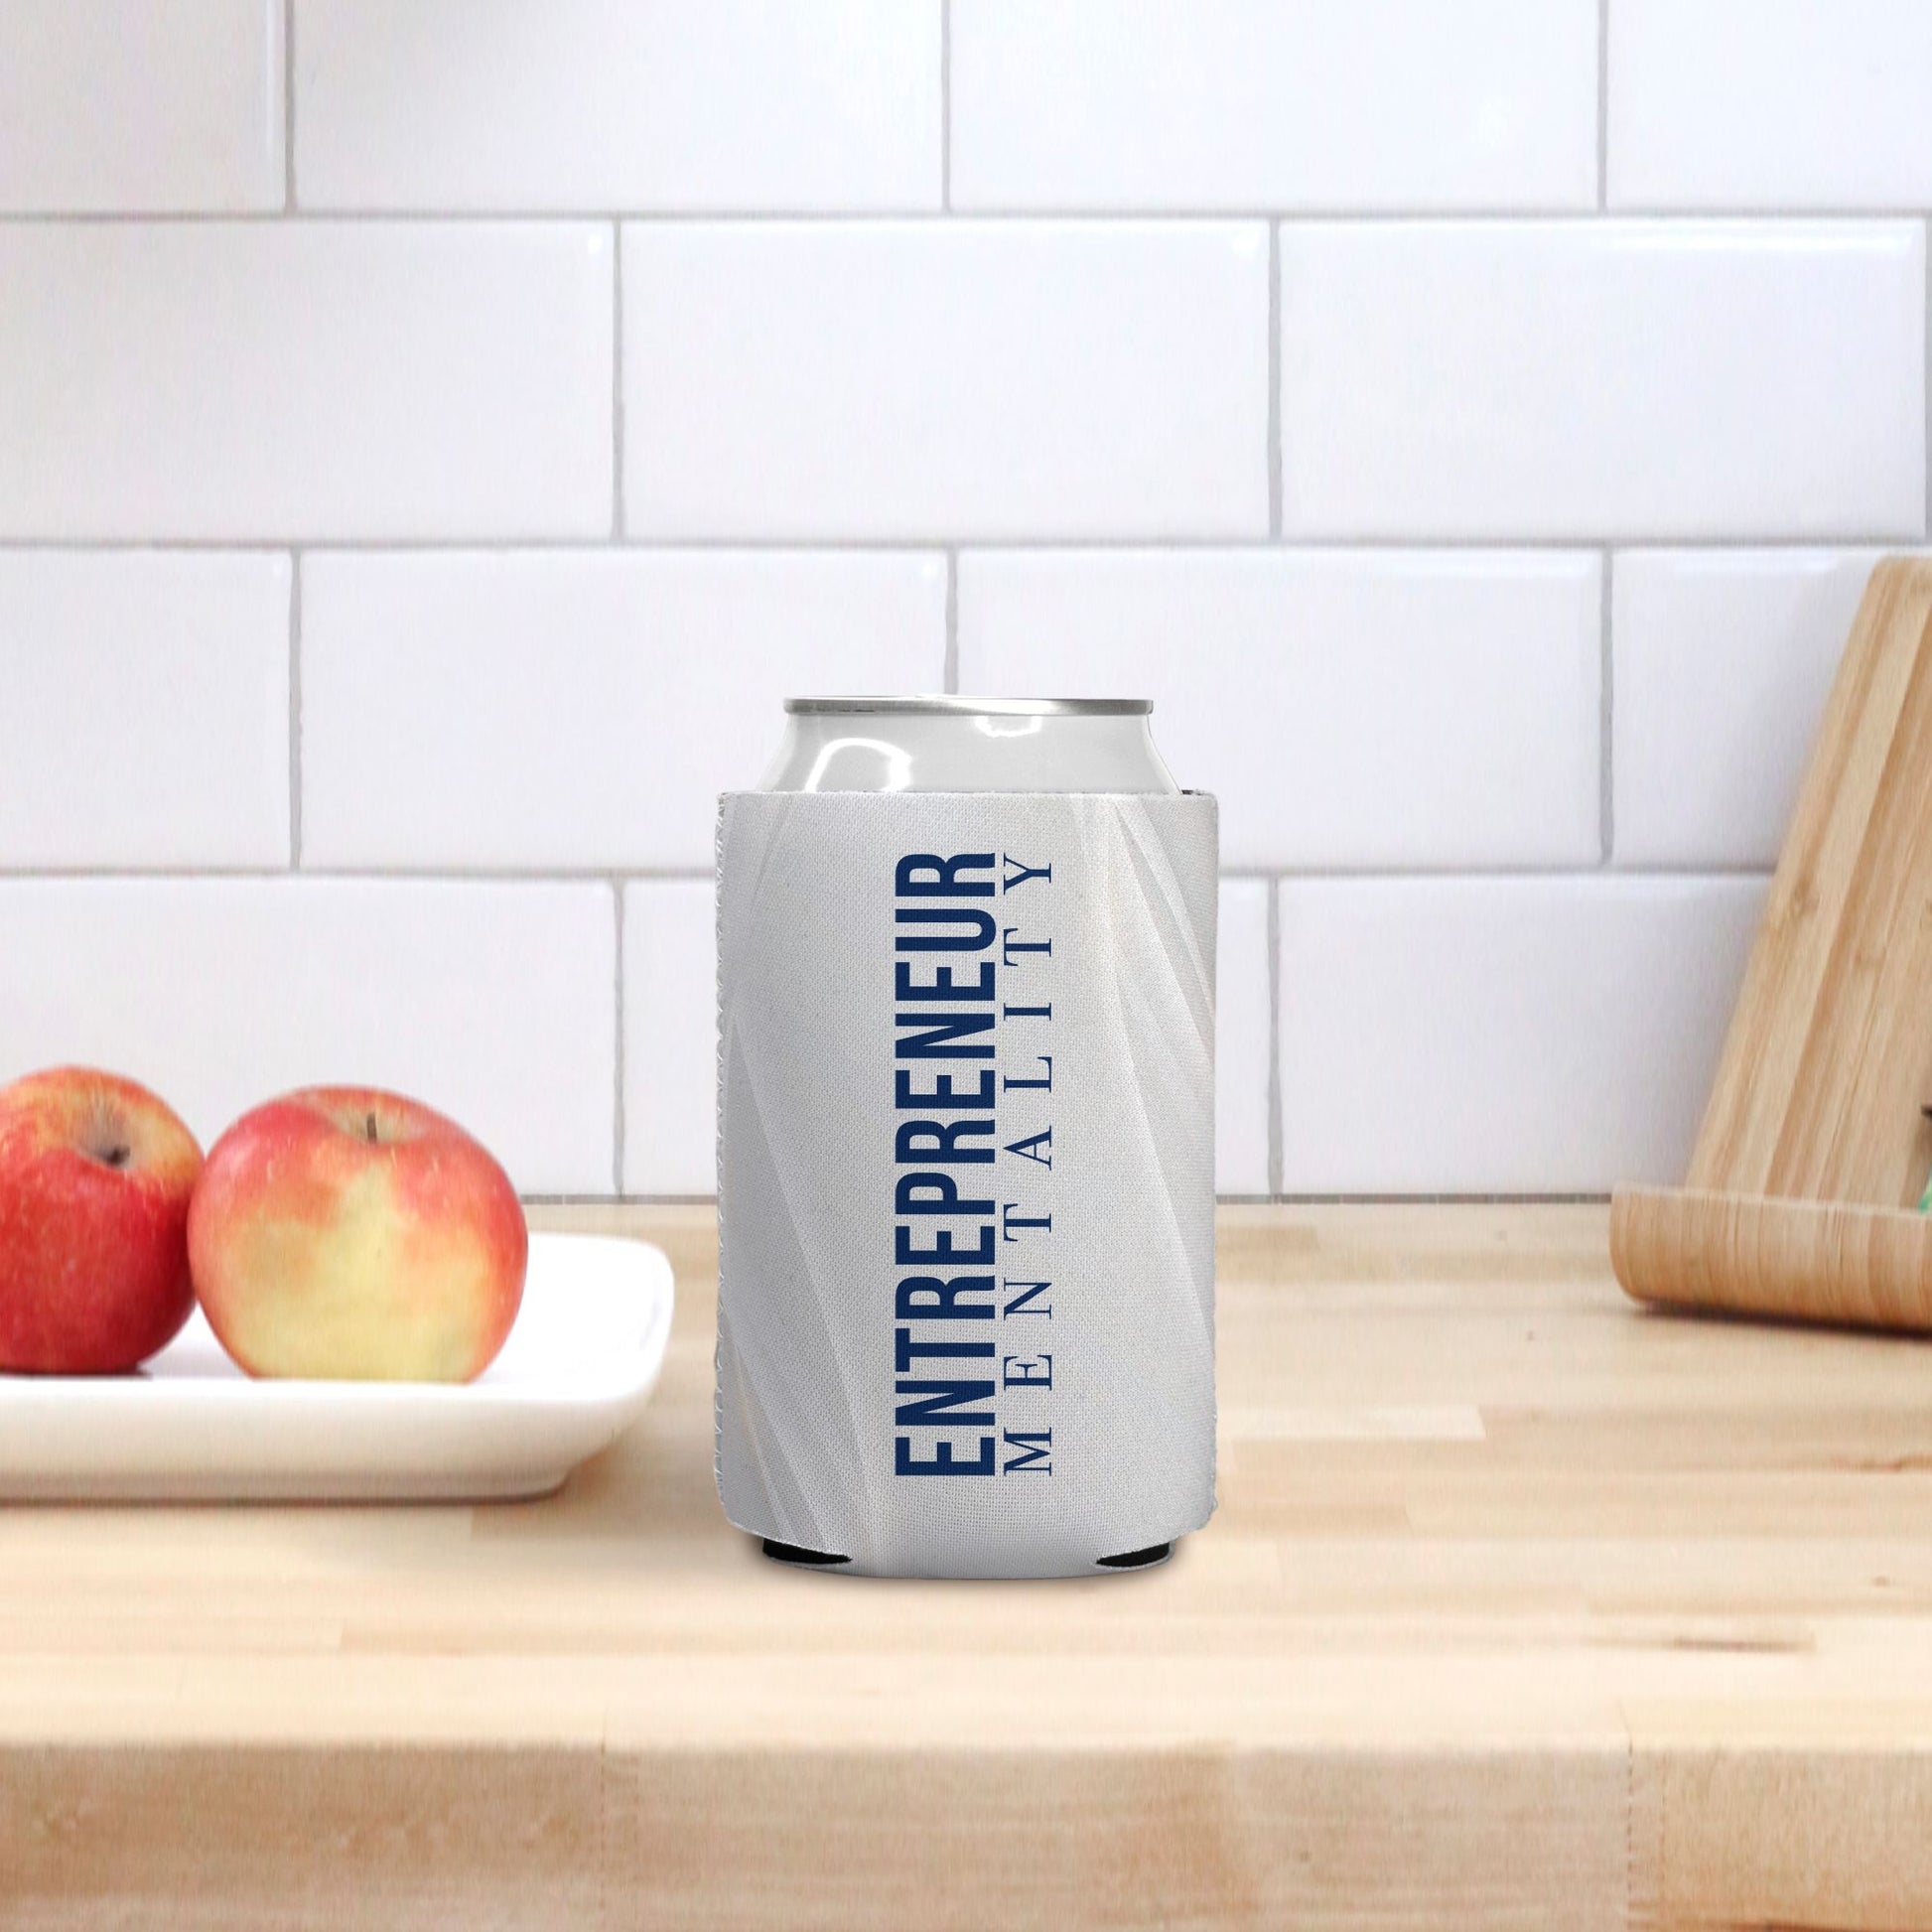 Enhance your drink experience with our Entrepreneur Mentality Can Cooler from Designs On The Go. Featuring a sleek design that embodies ambition and creativity, this cooler keeps your beverages chilled while showcasing your entrepreneurial spirit at every sip. Perfect for business events and daily inspiration!